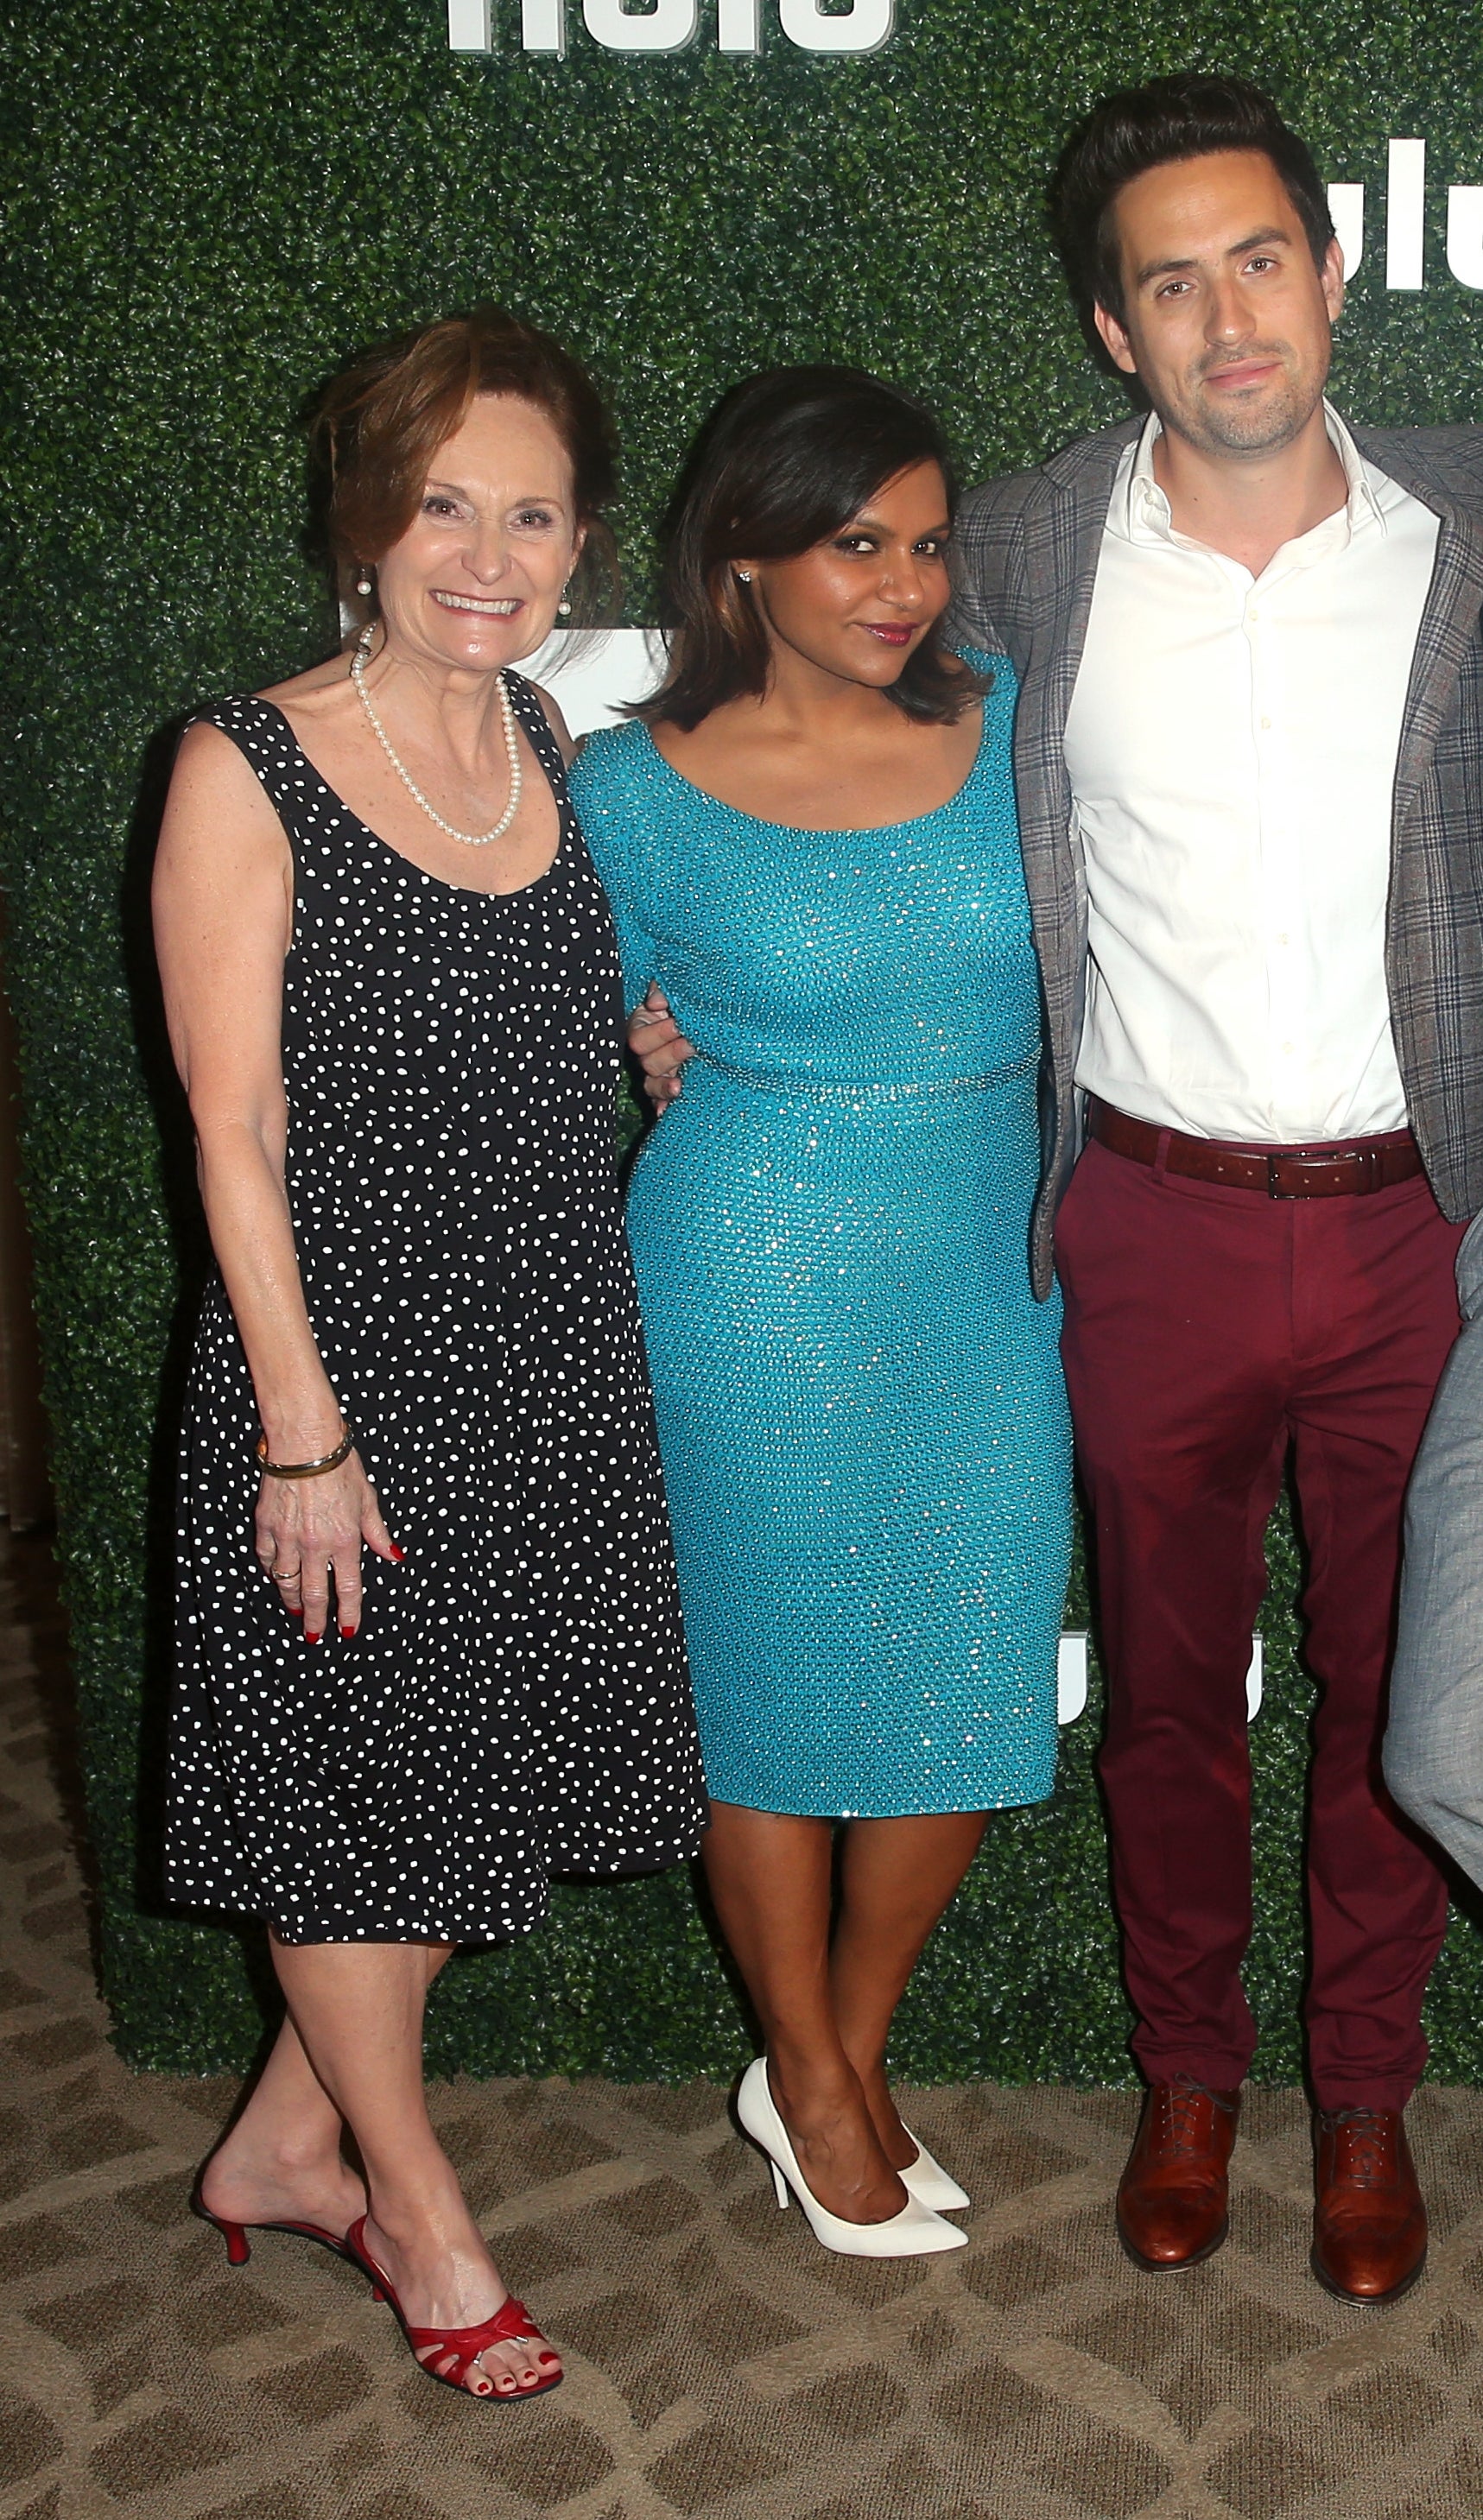 Beth Grant, Mindy Kaling, and Ed Weeks